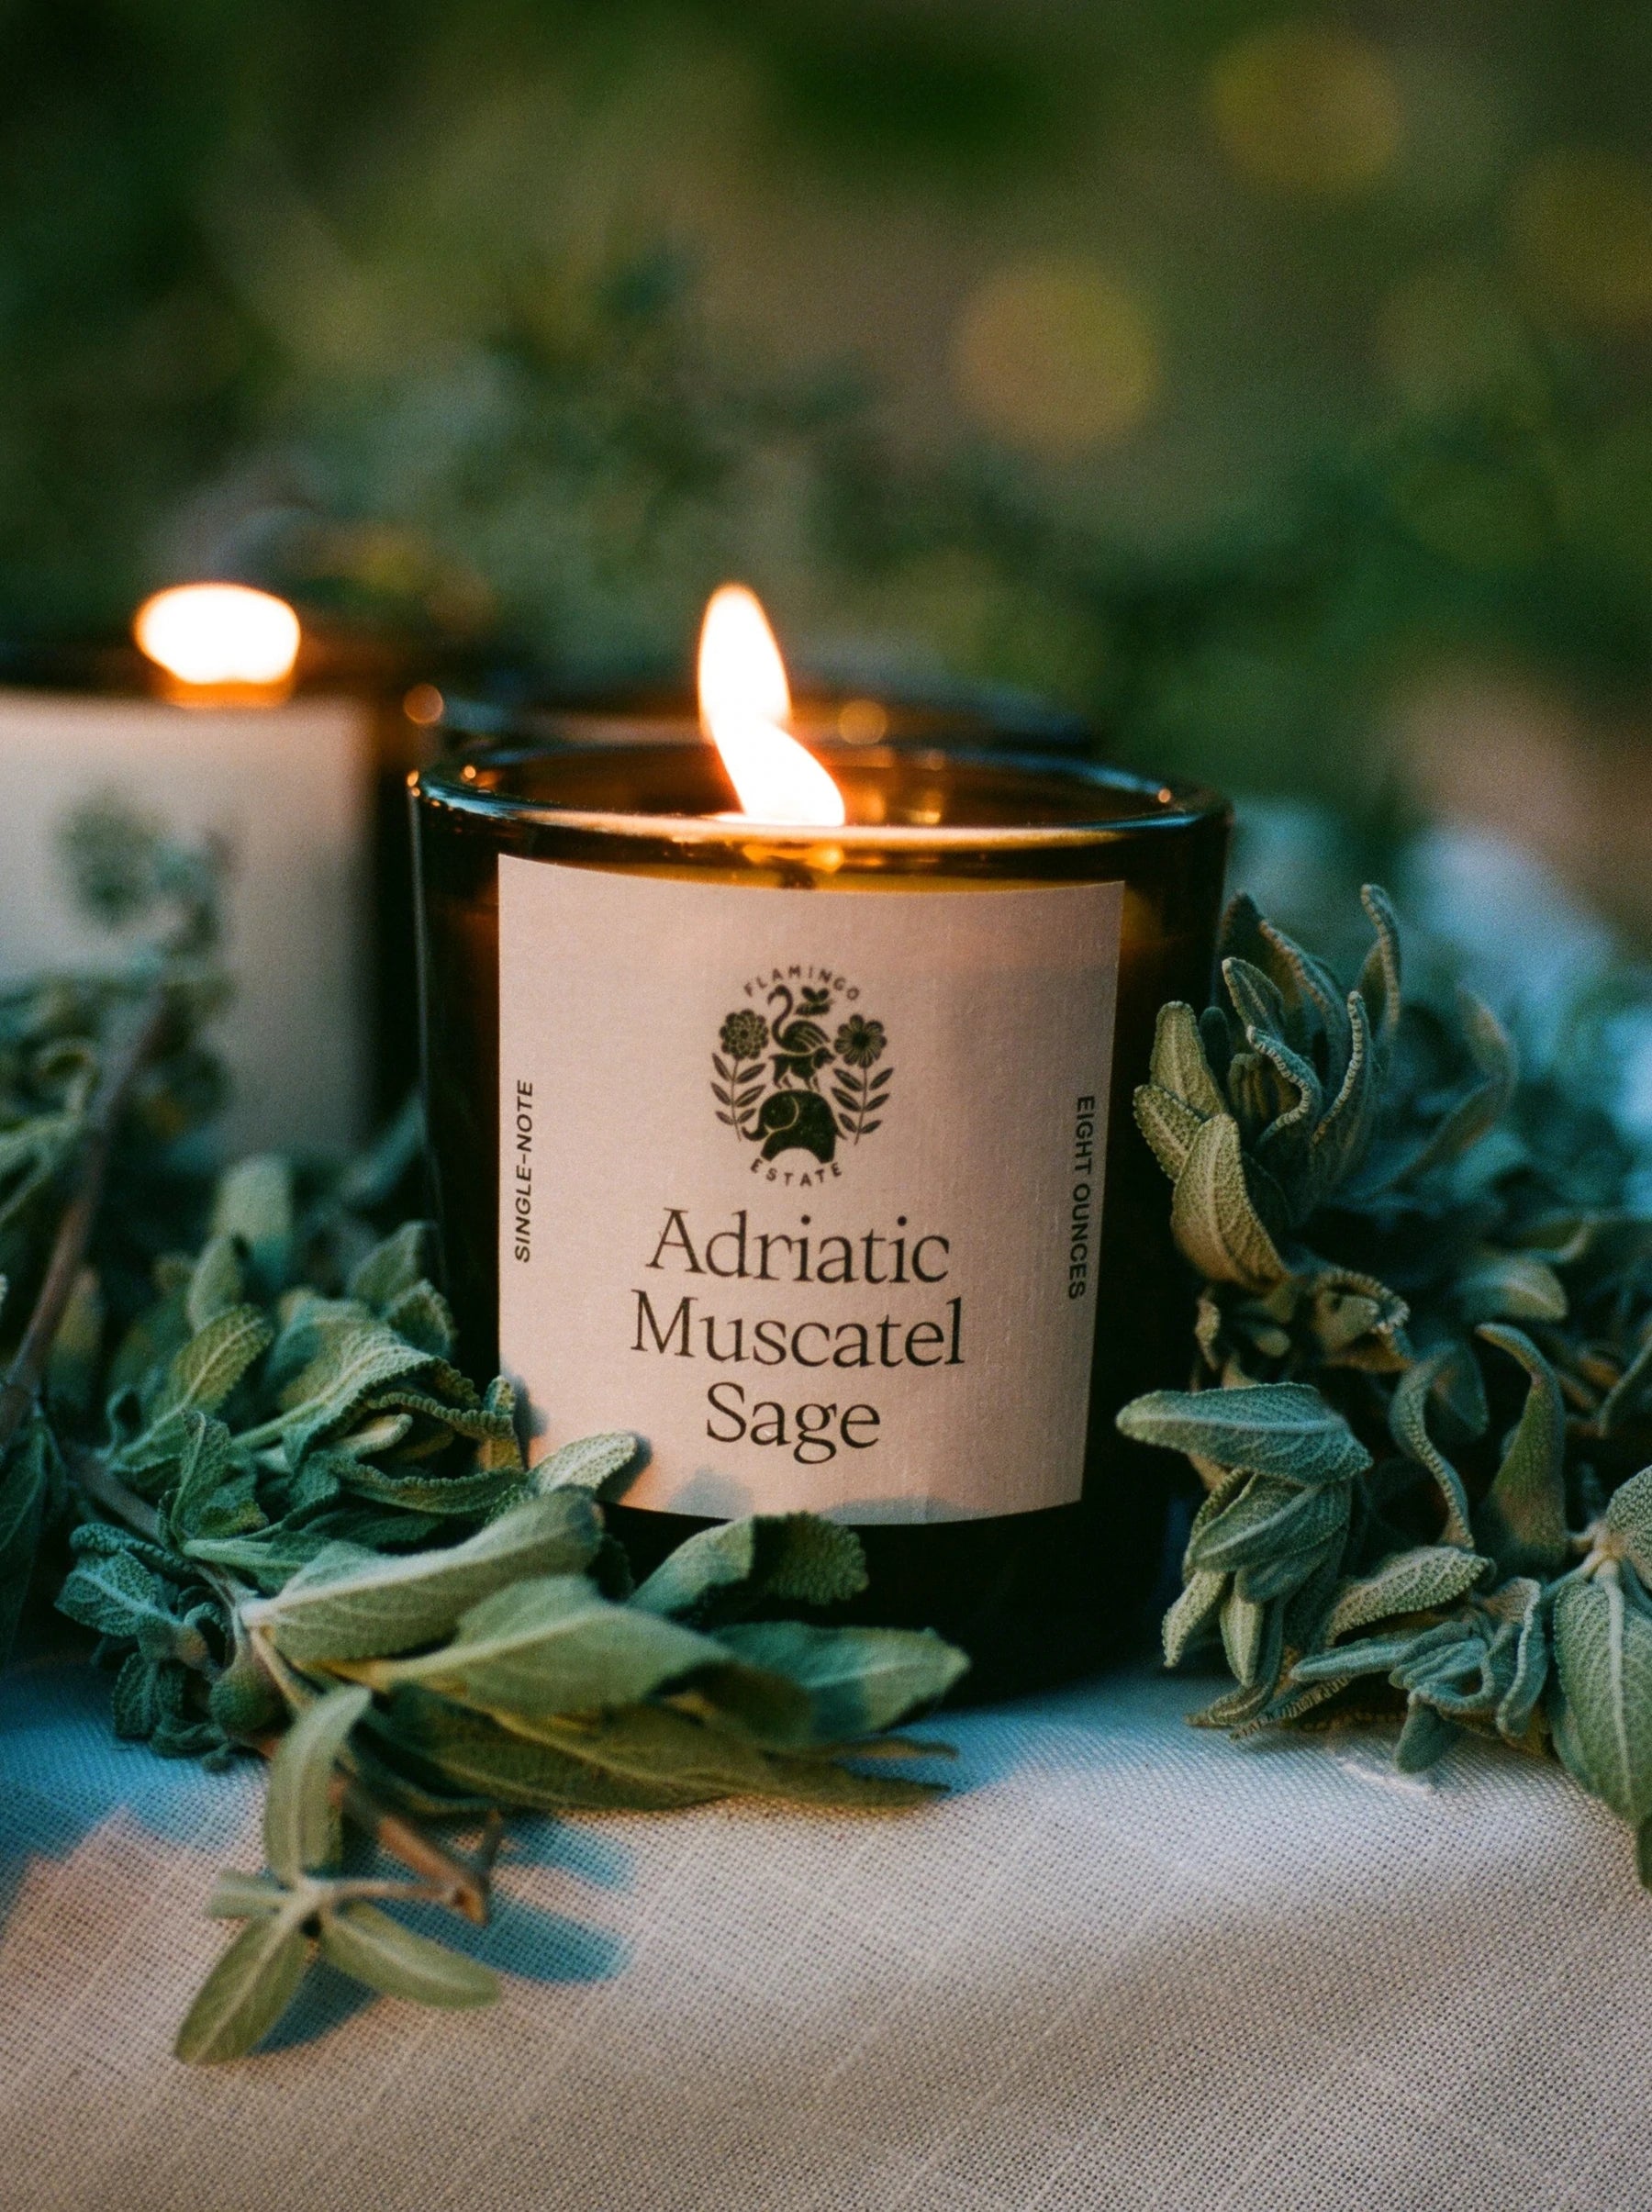 Adriatic Muscatel Sage Candle Candles Flamingo Estate Adriatic Muscatel Sage  